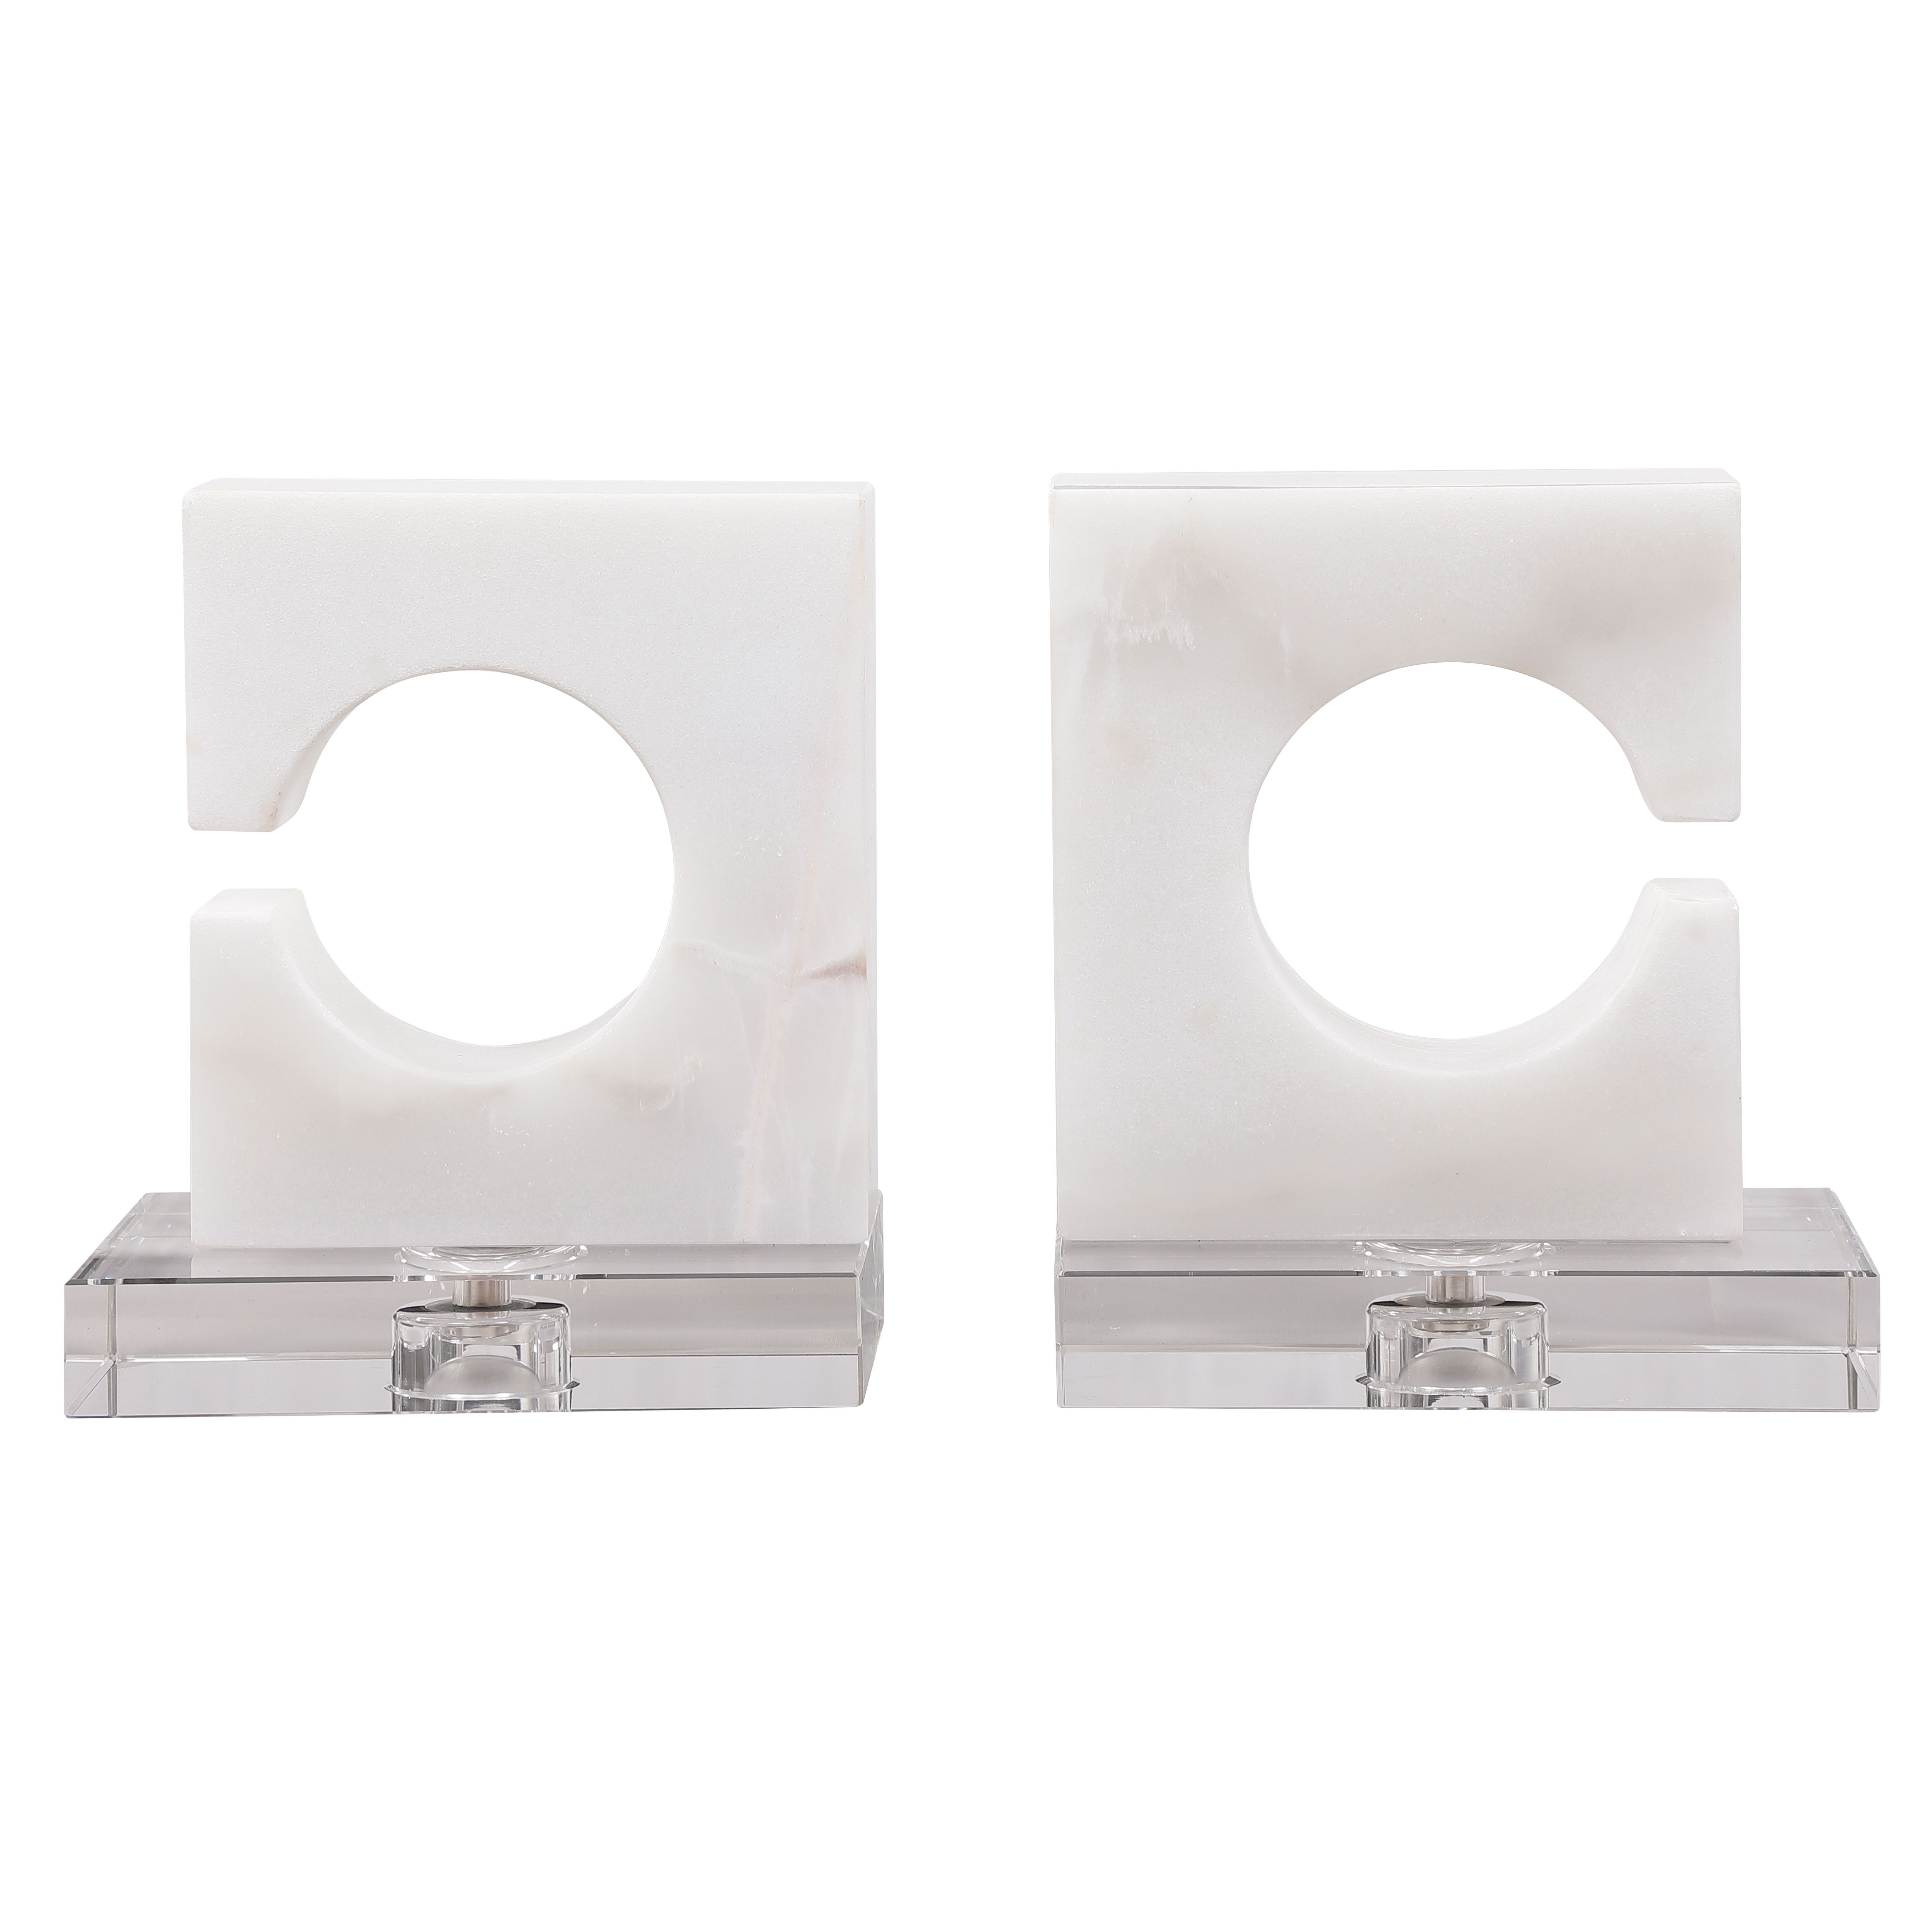 Clarin White & Gray Bookends, S/2 - Image 1